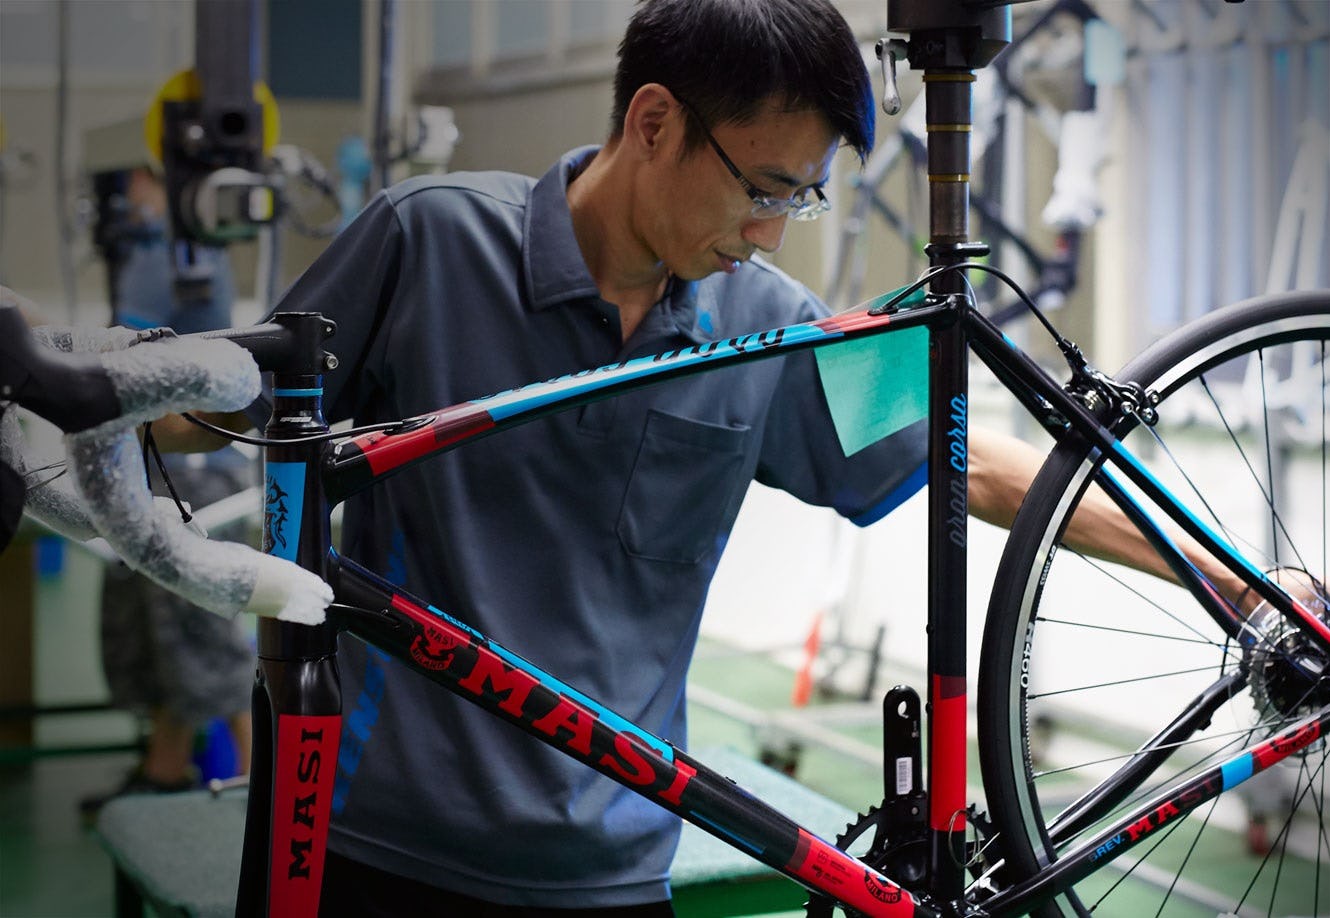 Kenstone is a well-known assembler for premium bicycles, including BH, Masi and Cervelo. – Photo Kenstone